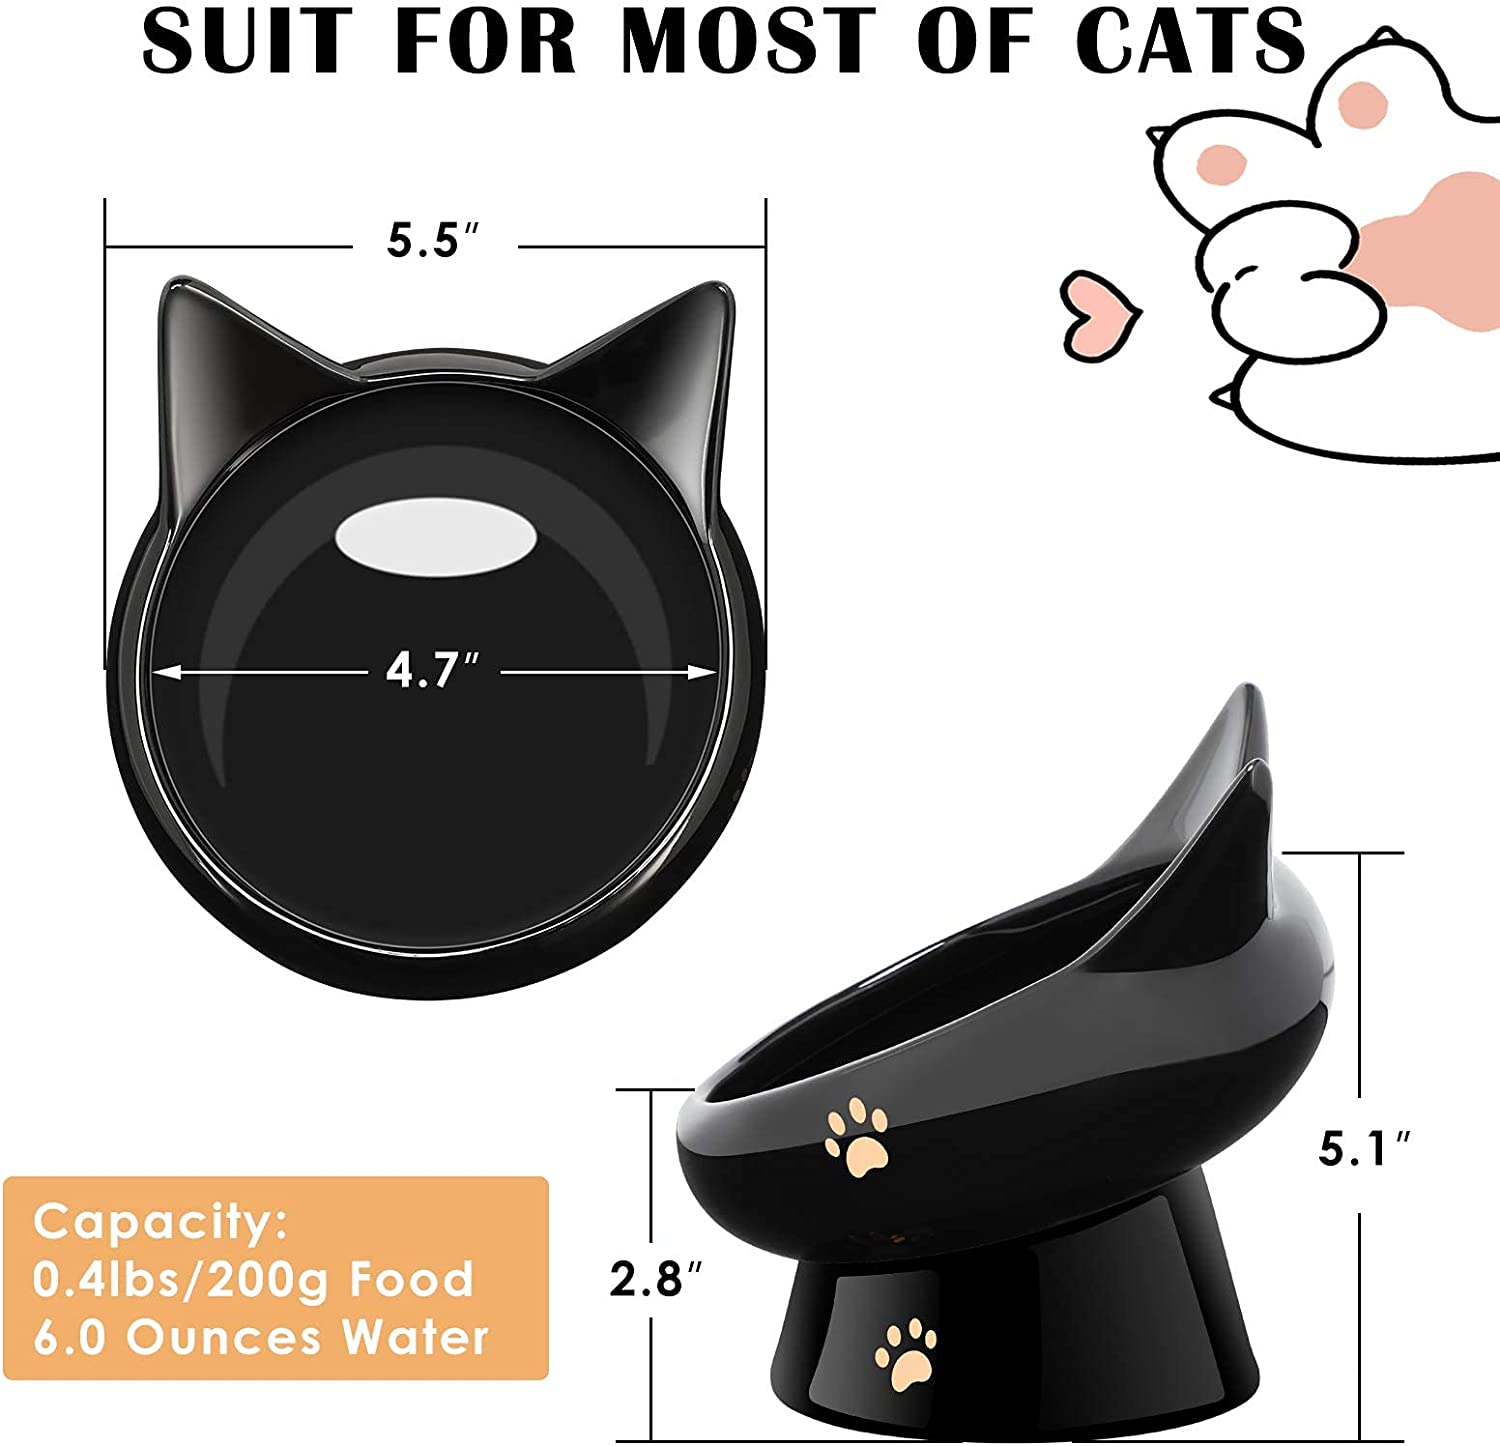 Cat Bowl,Raised Cat Food Bowls Anti Vomiting,Tilted Elevated Cat Bowl,Ceramic Pet Food Bowl for Flat-Faced Cats,Small Dogs,Protect Pets Spine,Dishwas